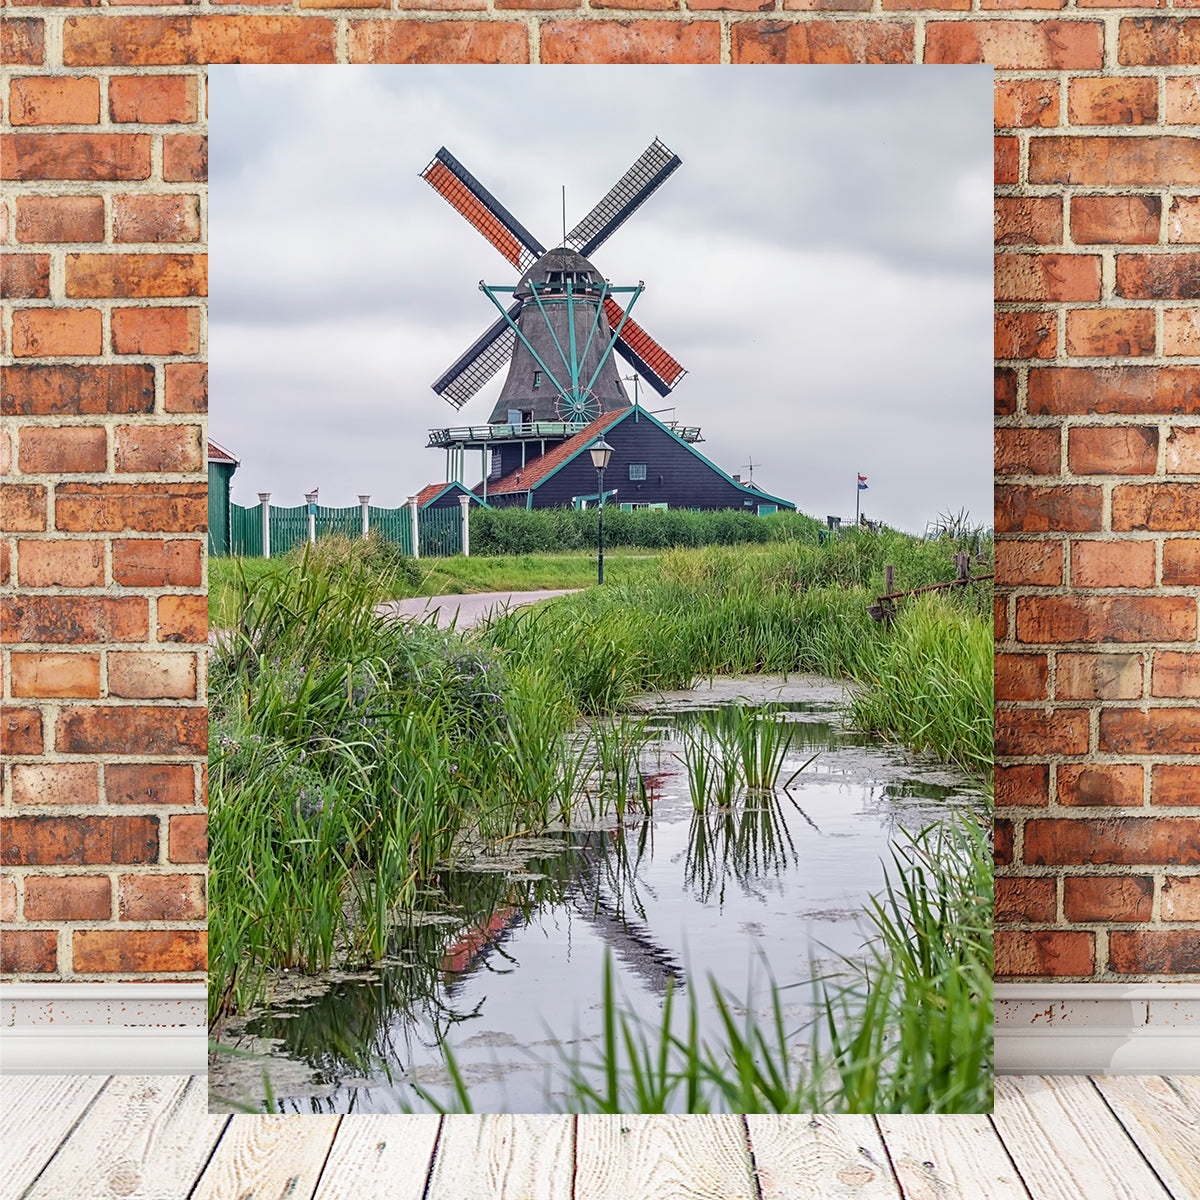 Windmill In Holland